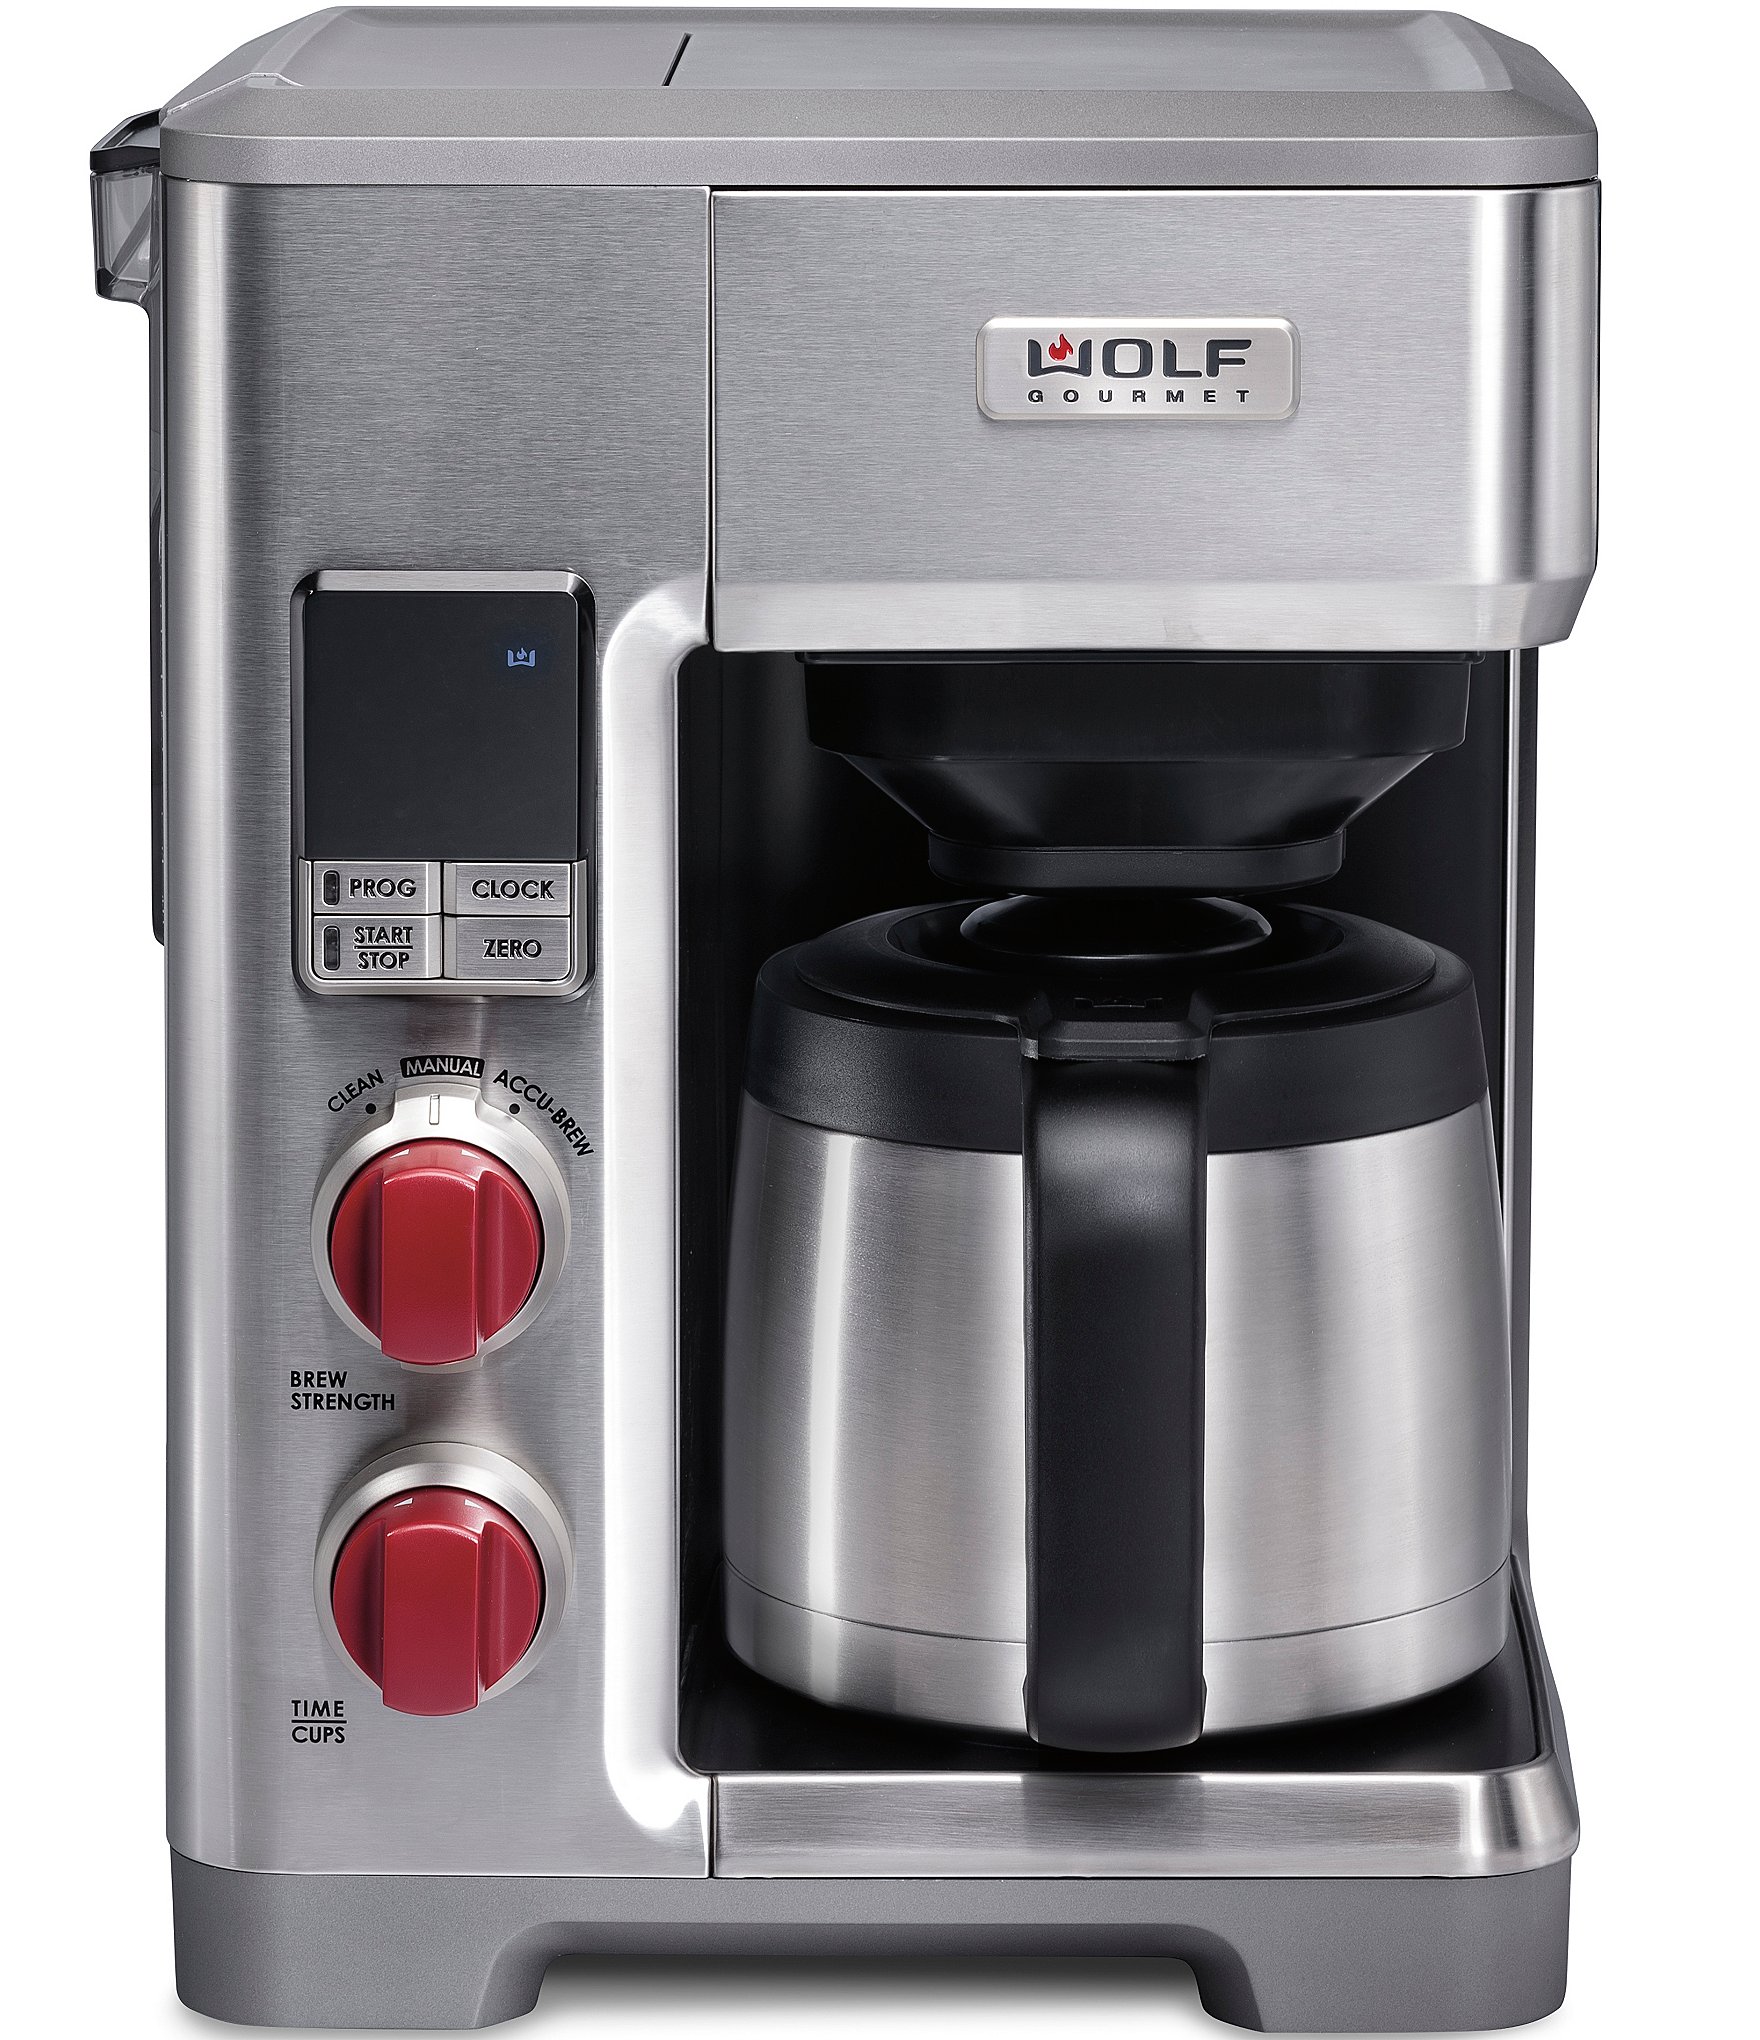 https://dimg.dillards.com/is/image/DillardsZoom/zoom/wolf-gourmet-automatic-drip-coffeemaker-with-red-knob/05781048_zi_stainless_steel.jpg